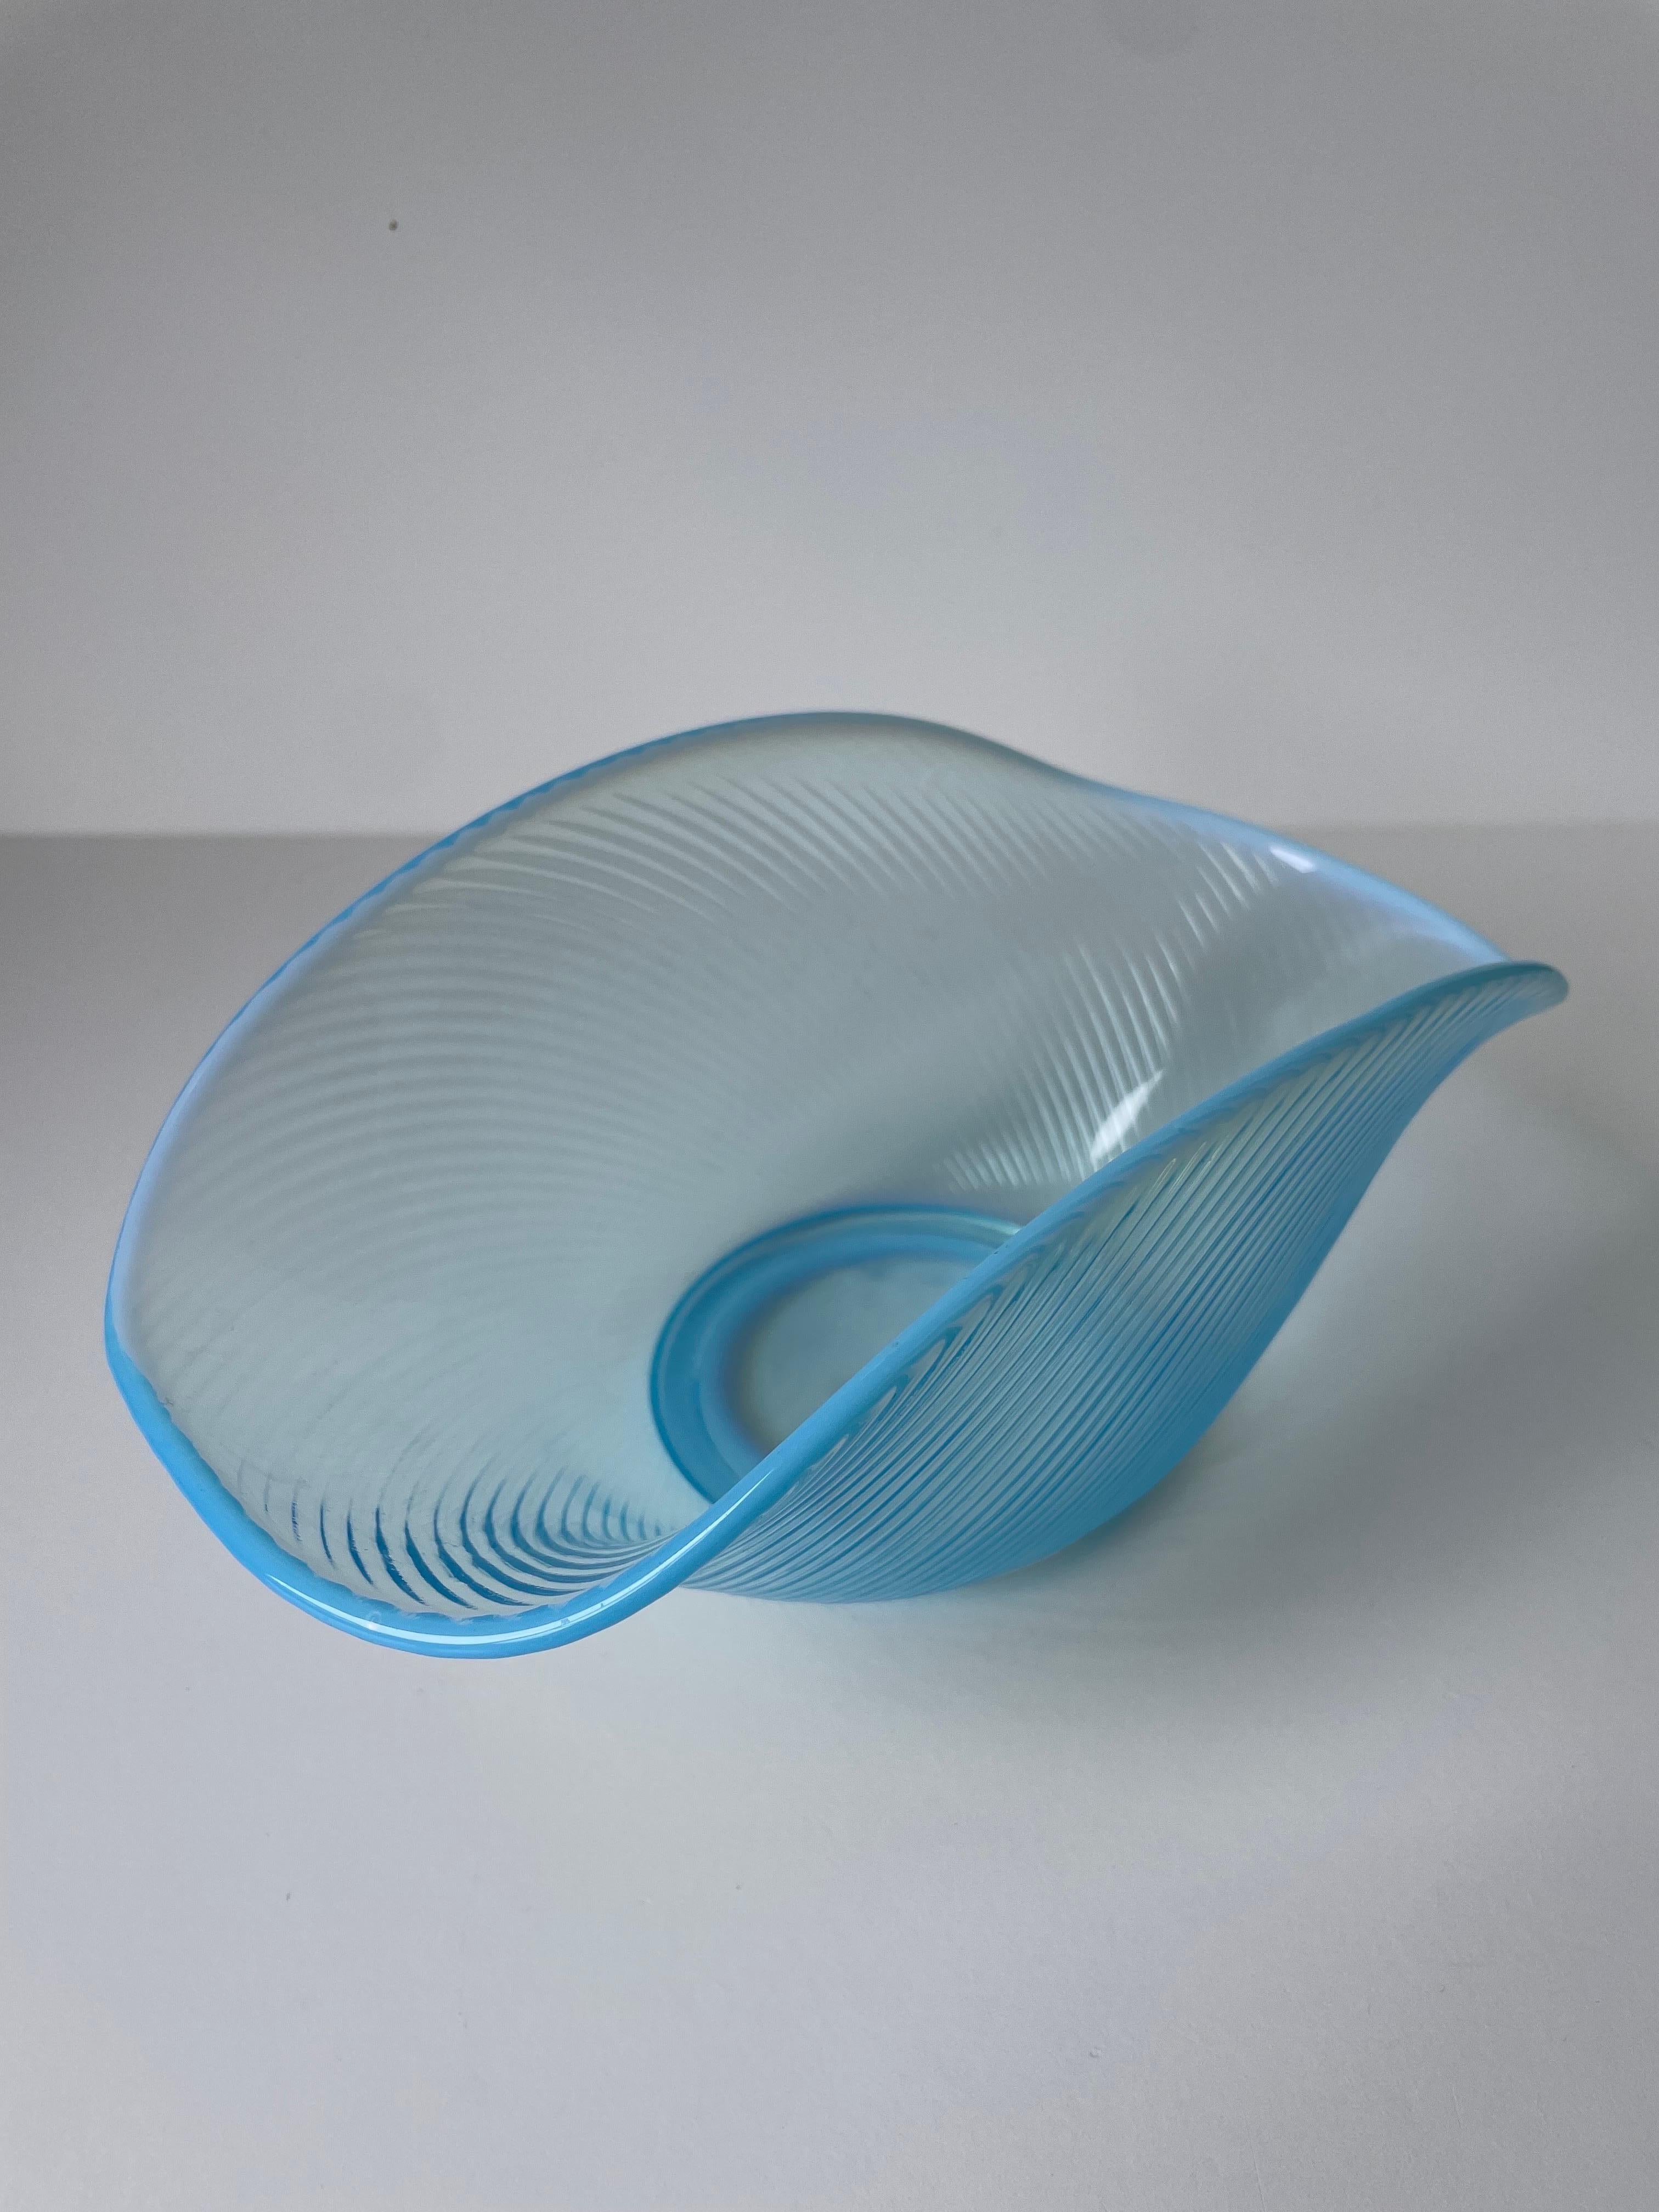 Hand-Crafted Arthur Percy Sky Blue Opalescent Glass Bowl, Gullaskruf, 1950s For Sale